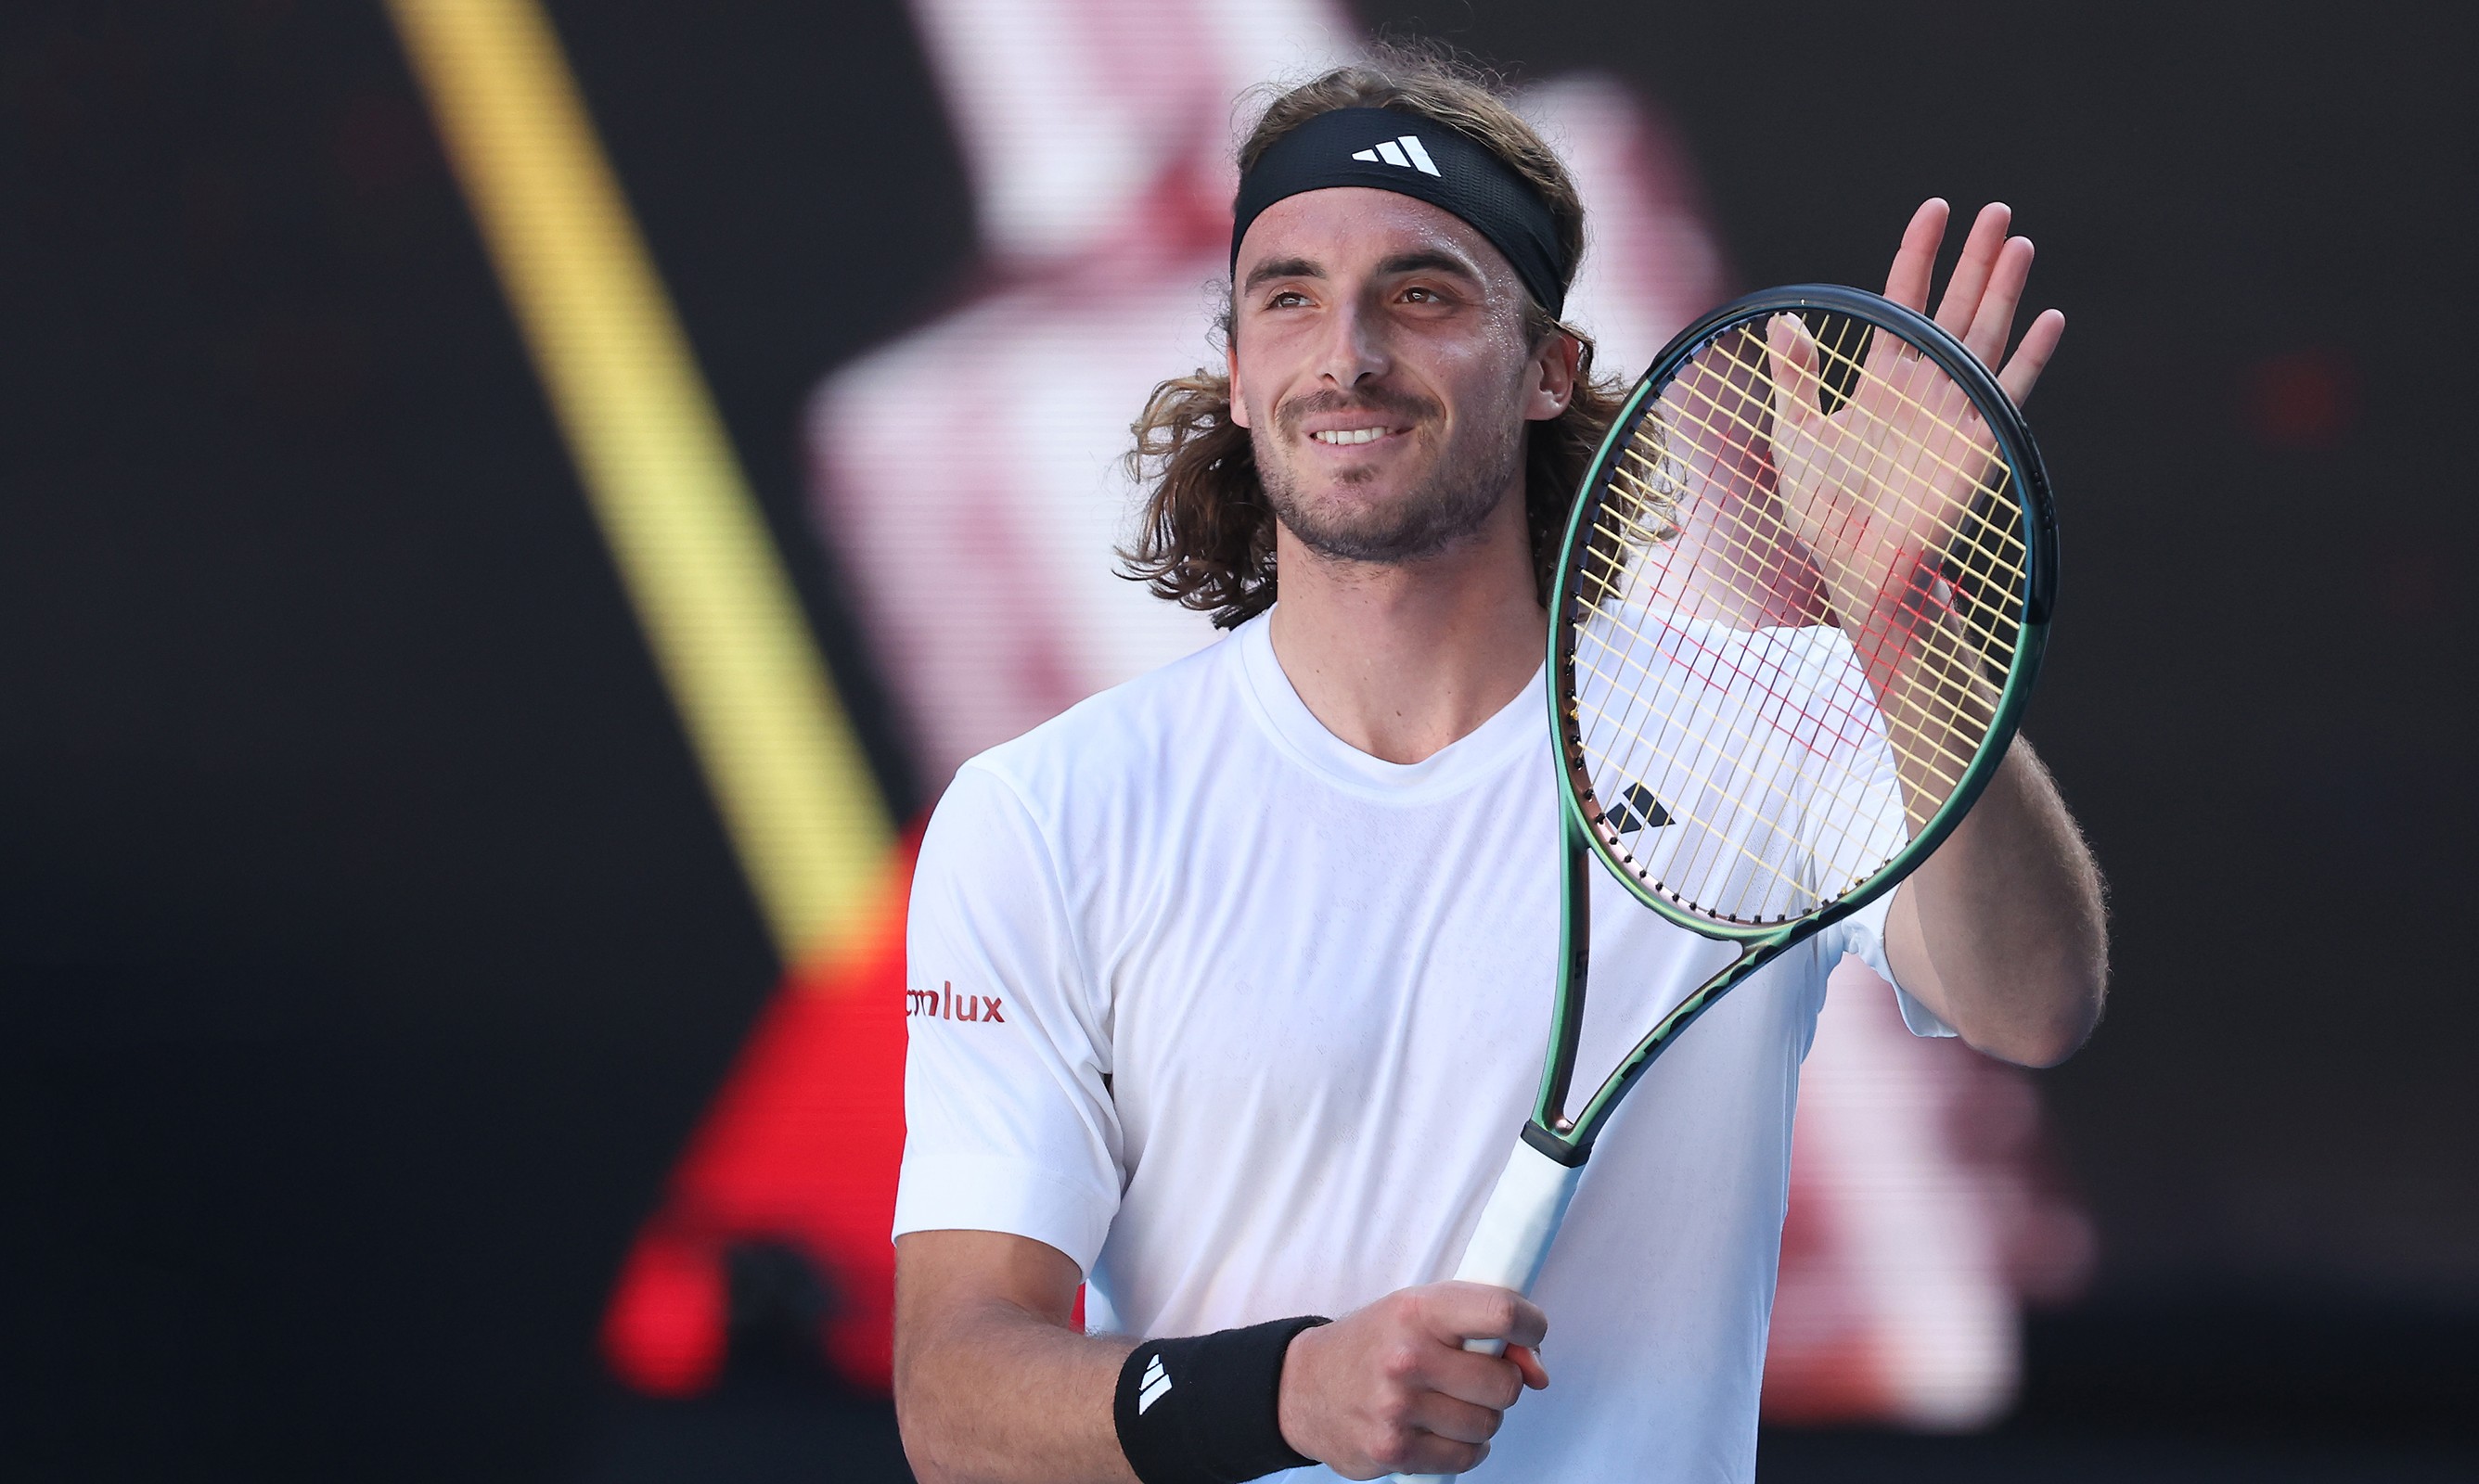 Stefanos Tsitsipas to play for Australian Open title and No